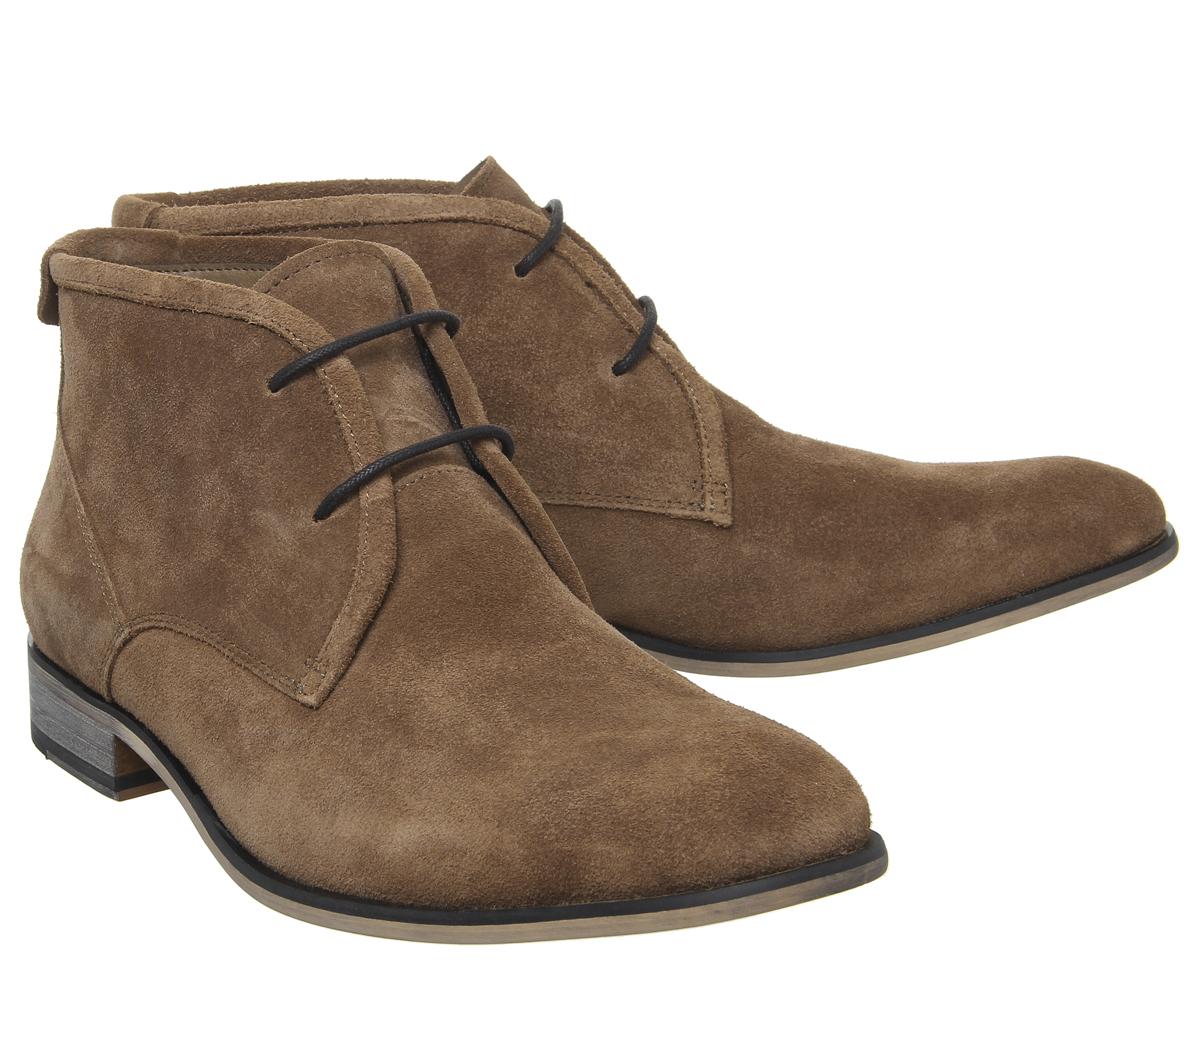 Office Barker Chukka Boots Tan Suede - Boots